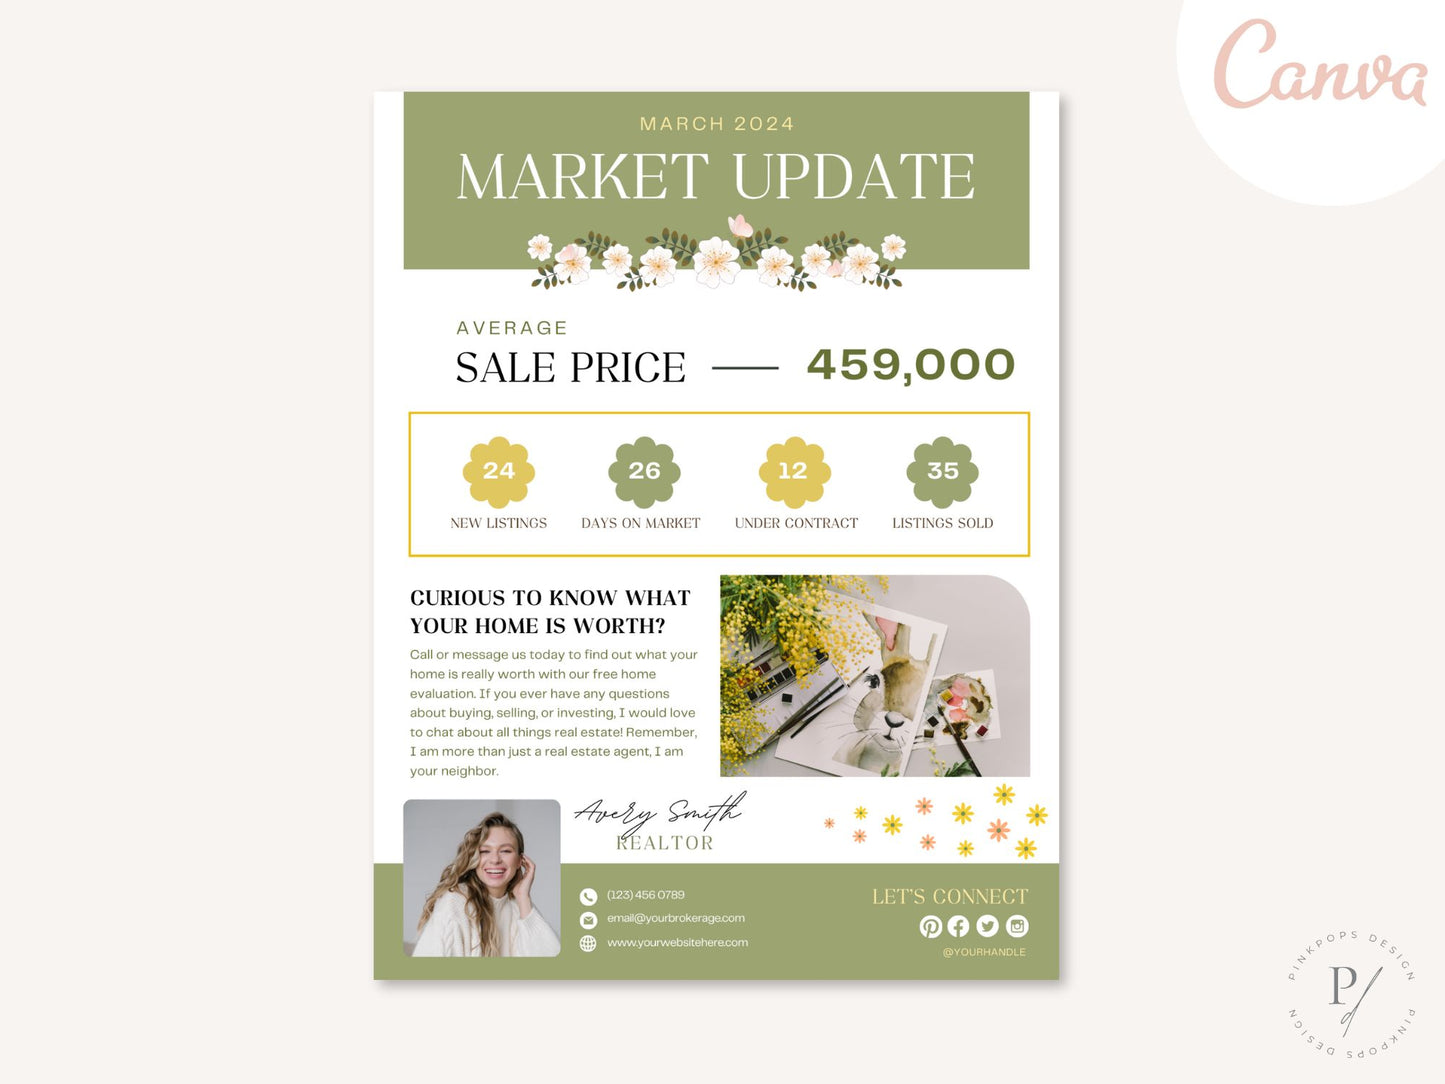 Spring Market Update Flyer - Professionally designed real estate flyer with essential market insights for the spring season.